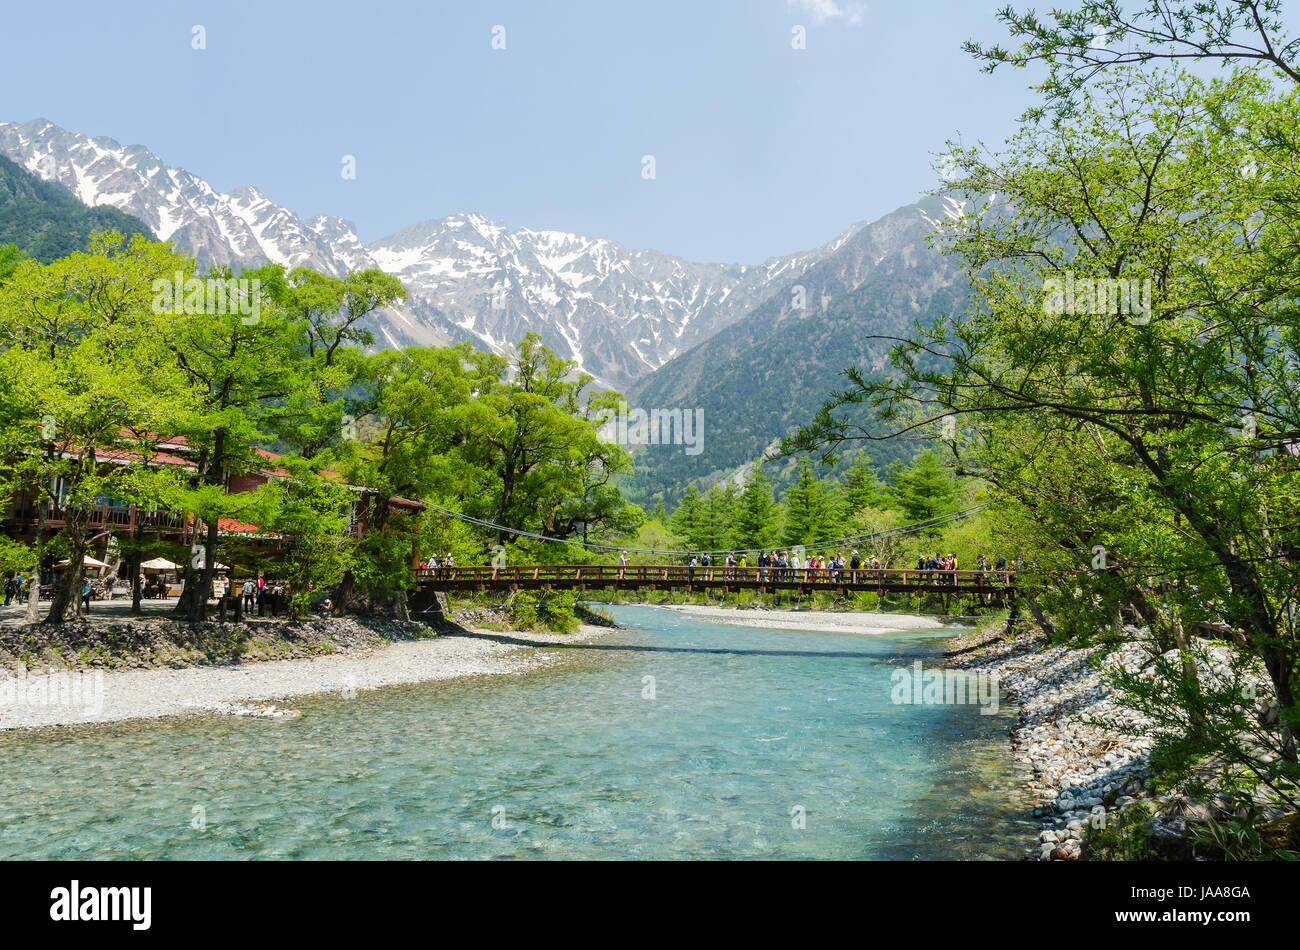 Nagano, Japan - May 21, 2016: Kappa bridge is the famous place in kamikochi  national park. Many tourists sightseeing and taking a picture Stock Photo -  Alamy